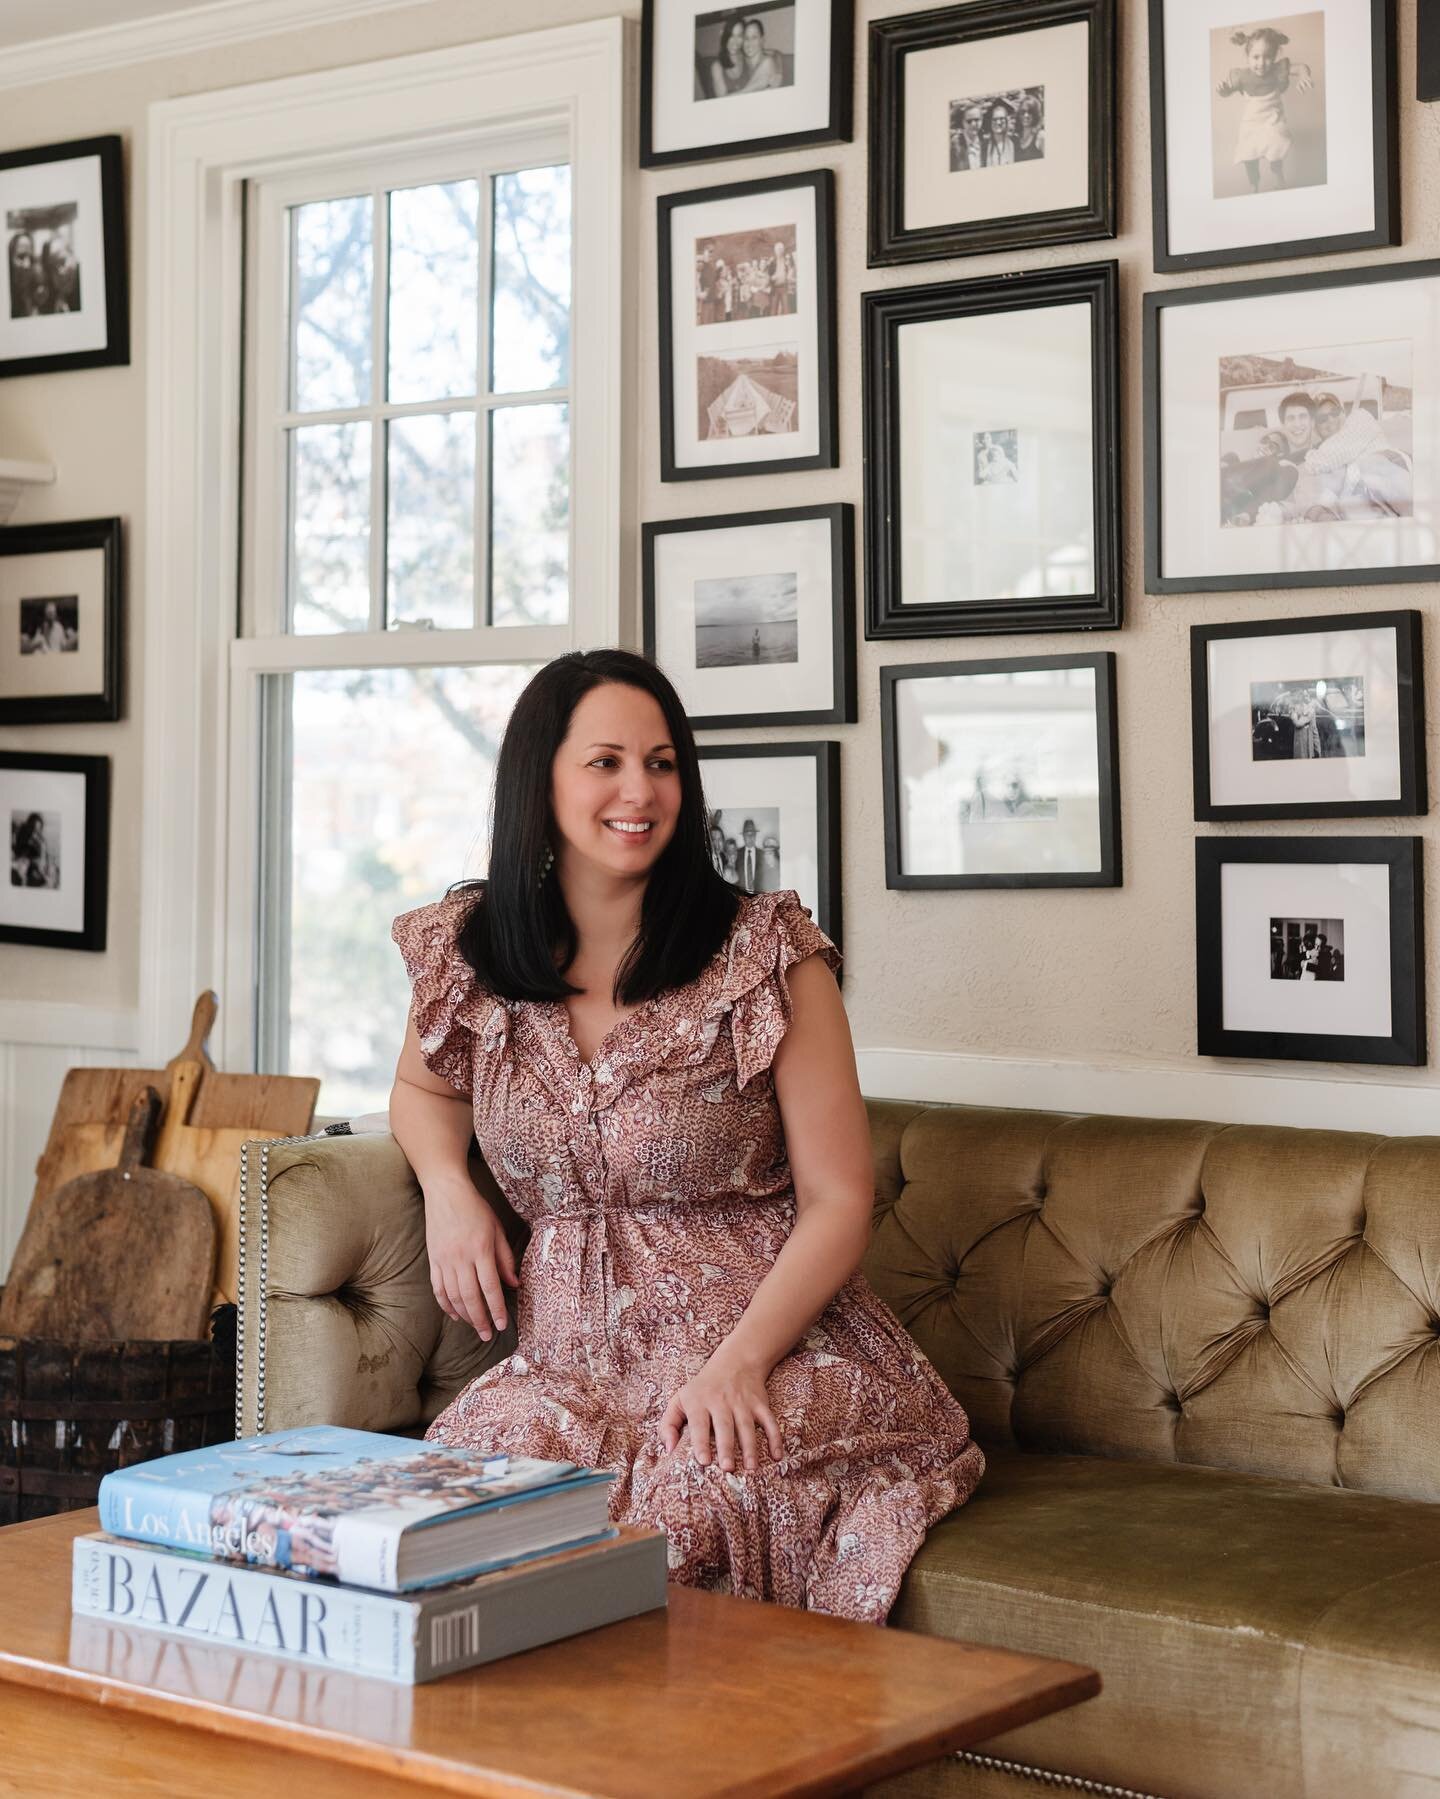 CURATOR TAKEOVER! Follow along in stories to see antiquing finds by @jennifergalik in Saugherties, NY. Jen has over 20 years of experience in the fashion industry and a long-time love of things with history. Heck, we may even embarrass her a bit and 